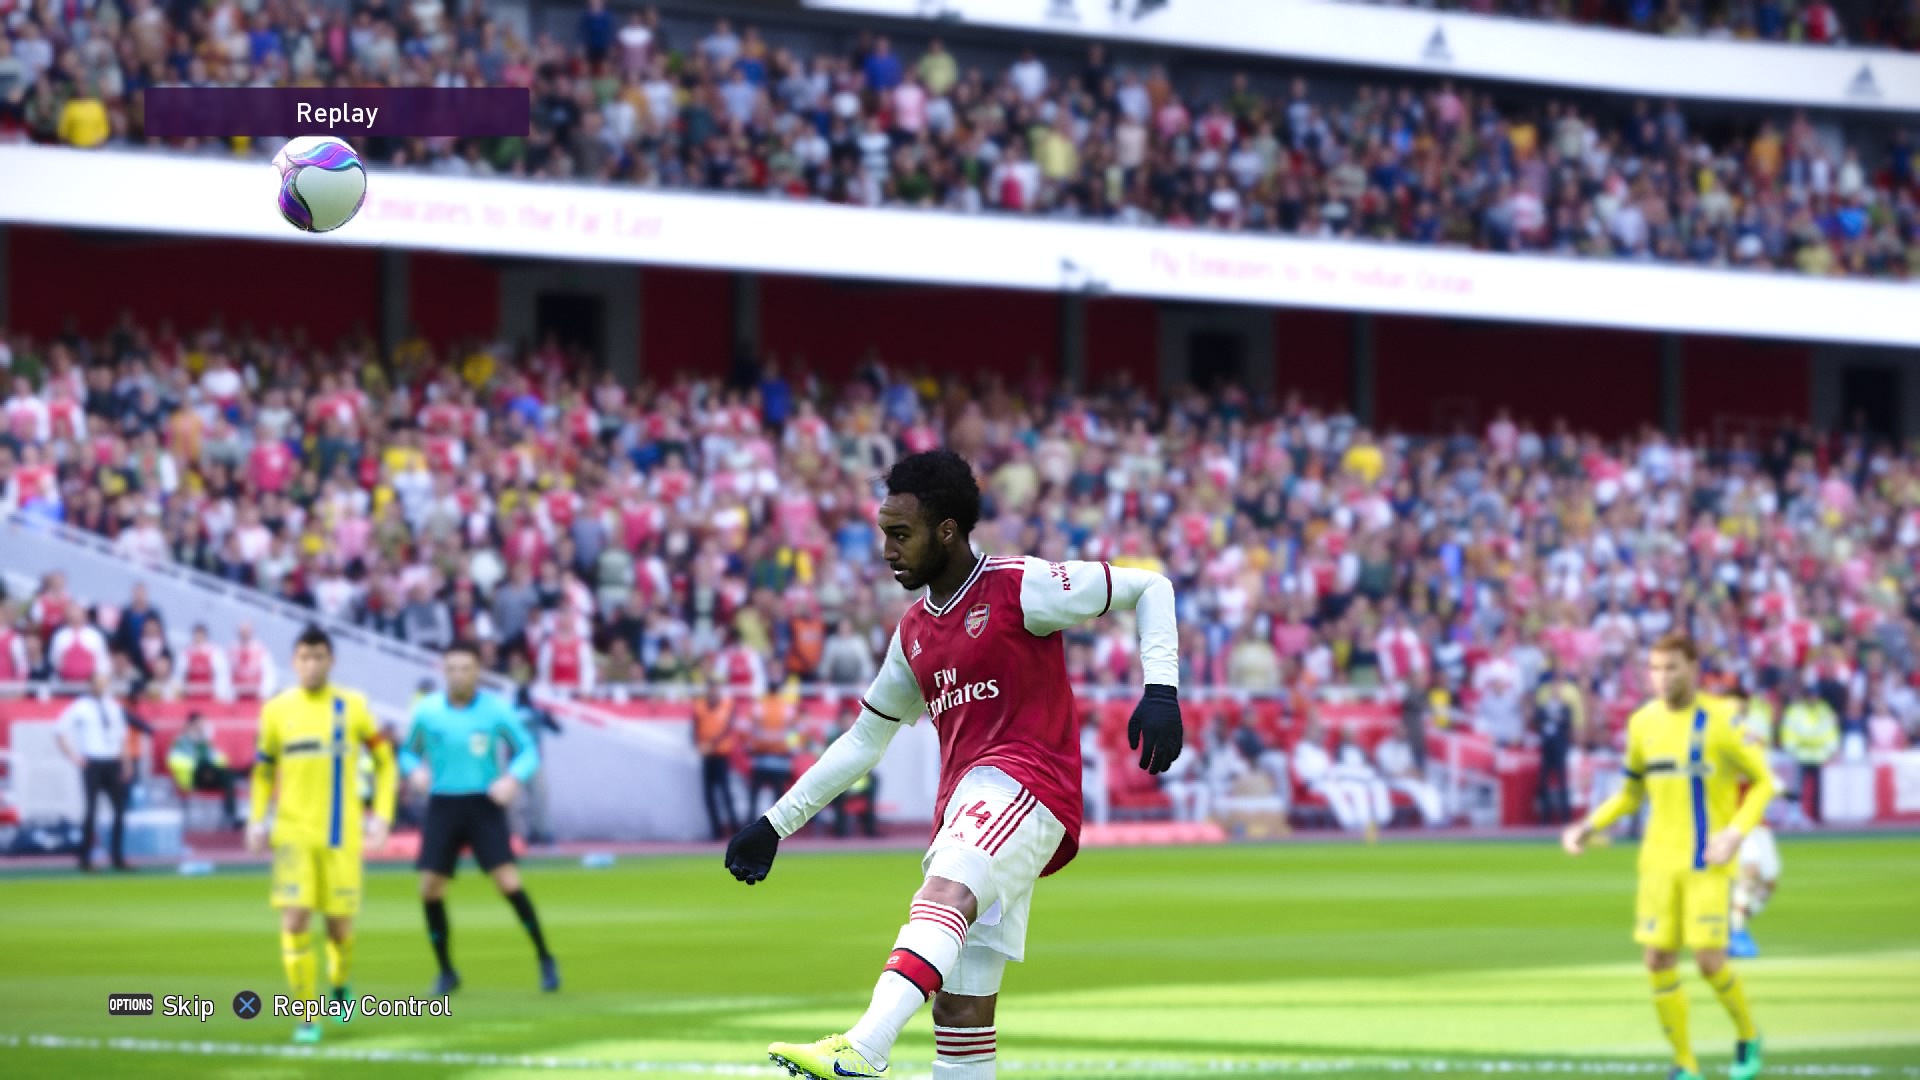 eFootball PES 2020 Review